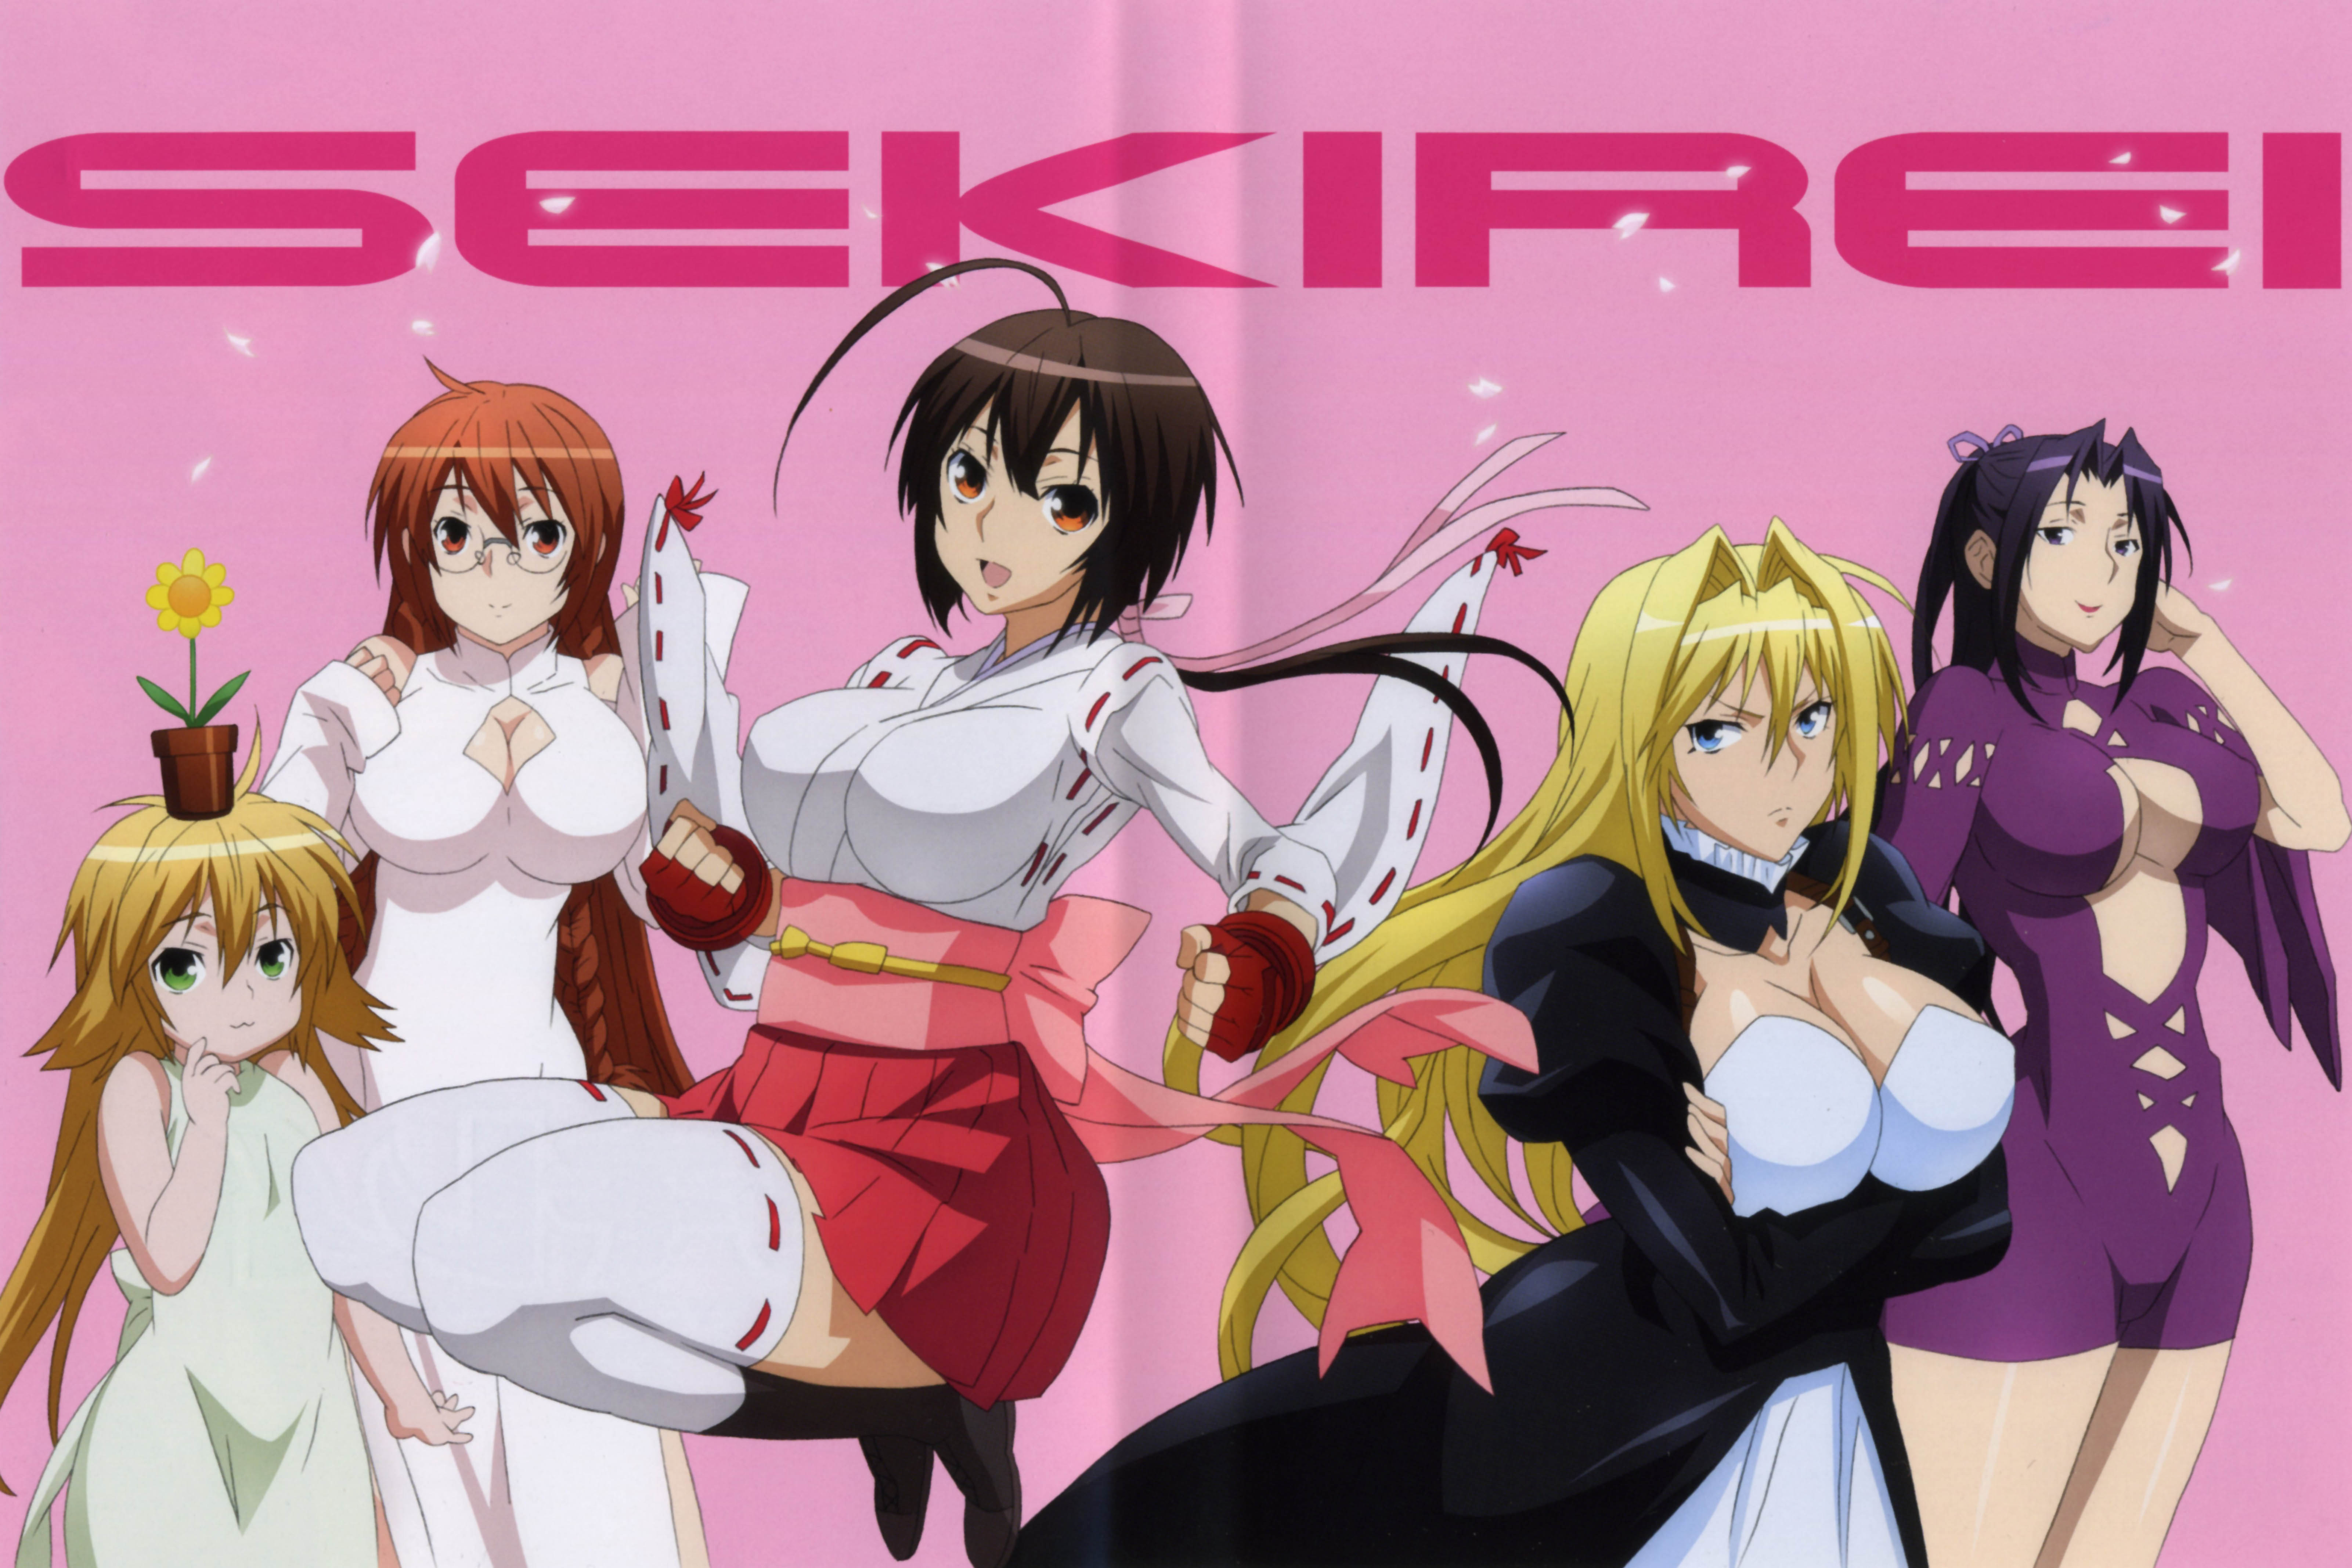 Breimh’s Anime Review: Sekirei - Pure Engagement.